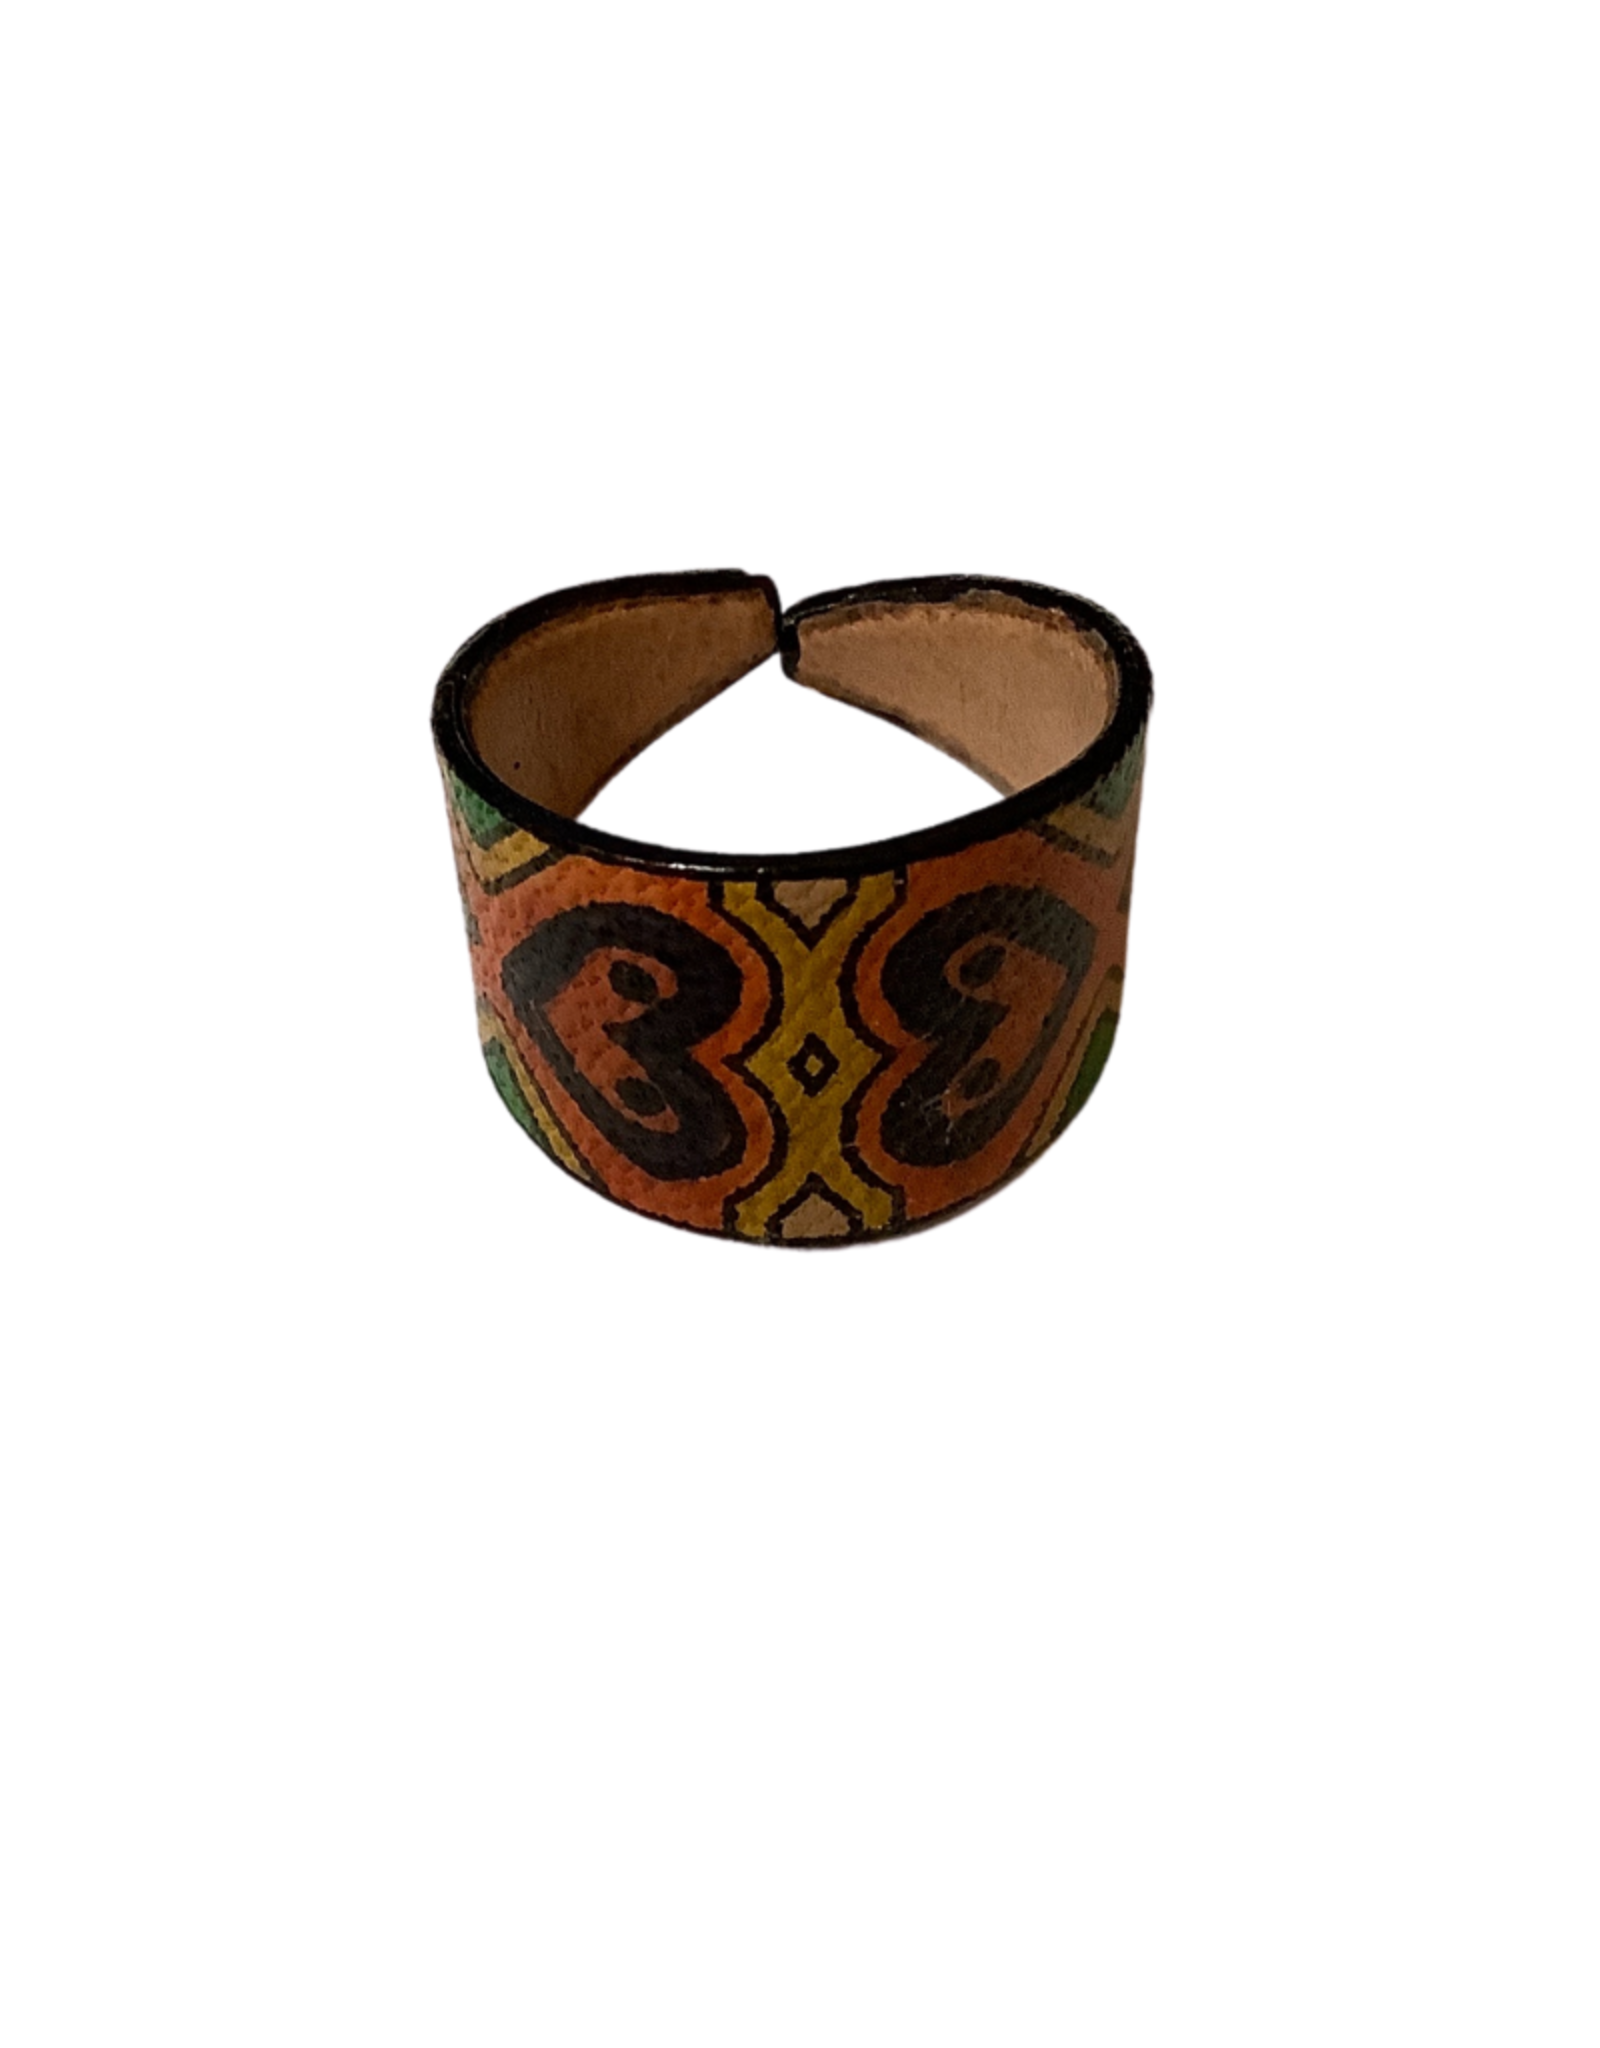 Leather Ring - Hand Painted Hearts - Indonesia